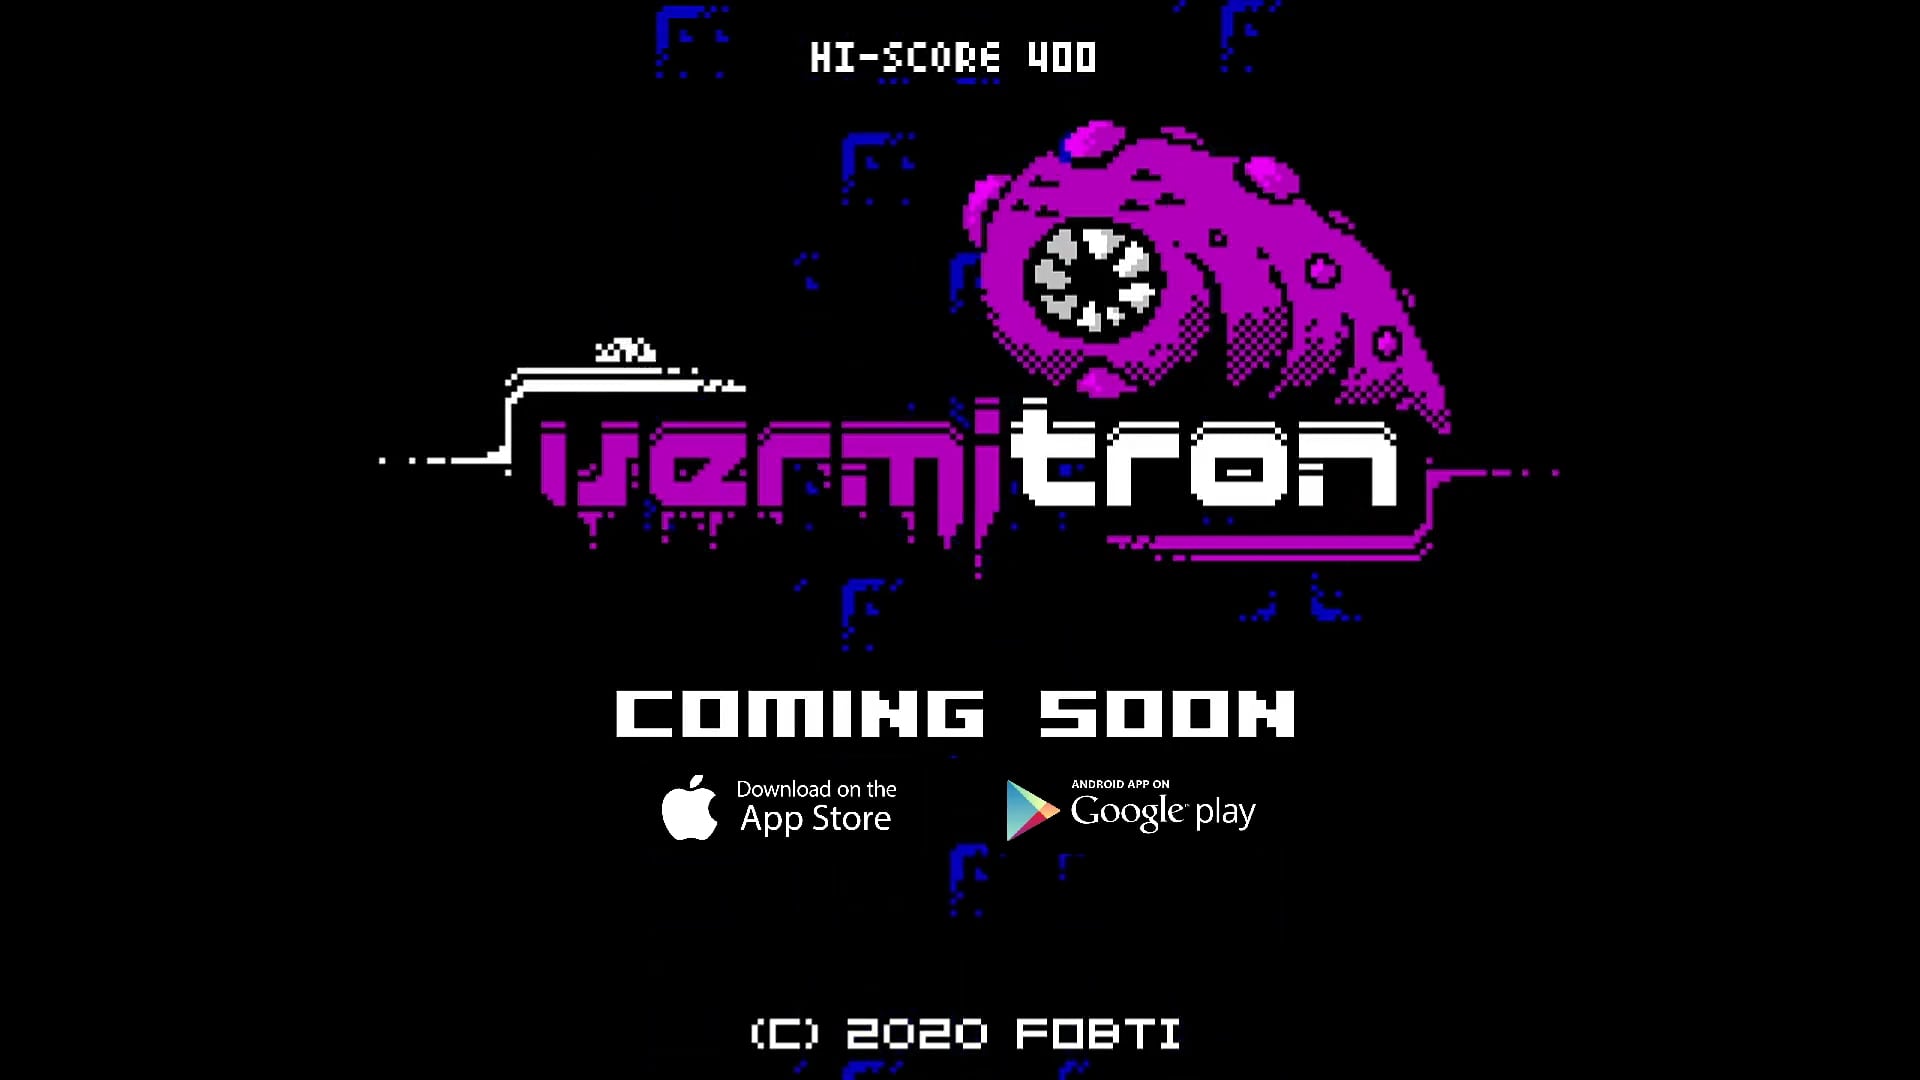 New "Vermitron" Classic Game Now Available On Mobile!